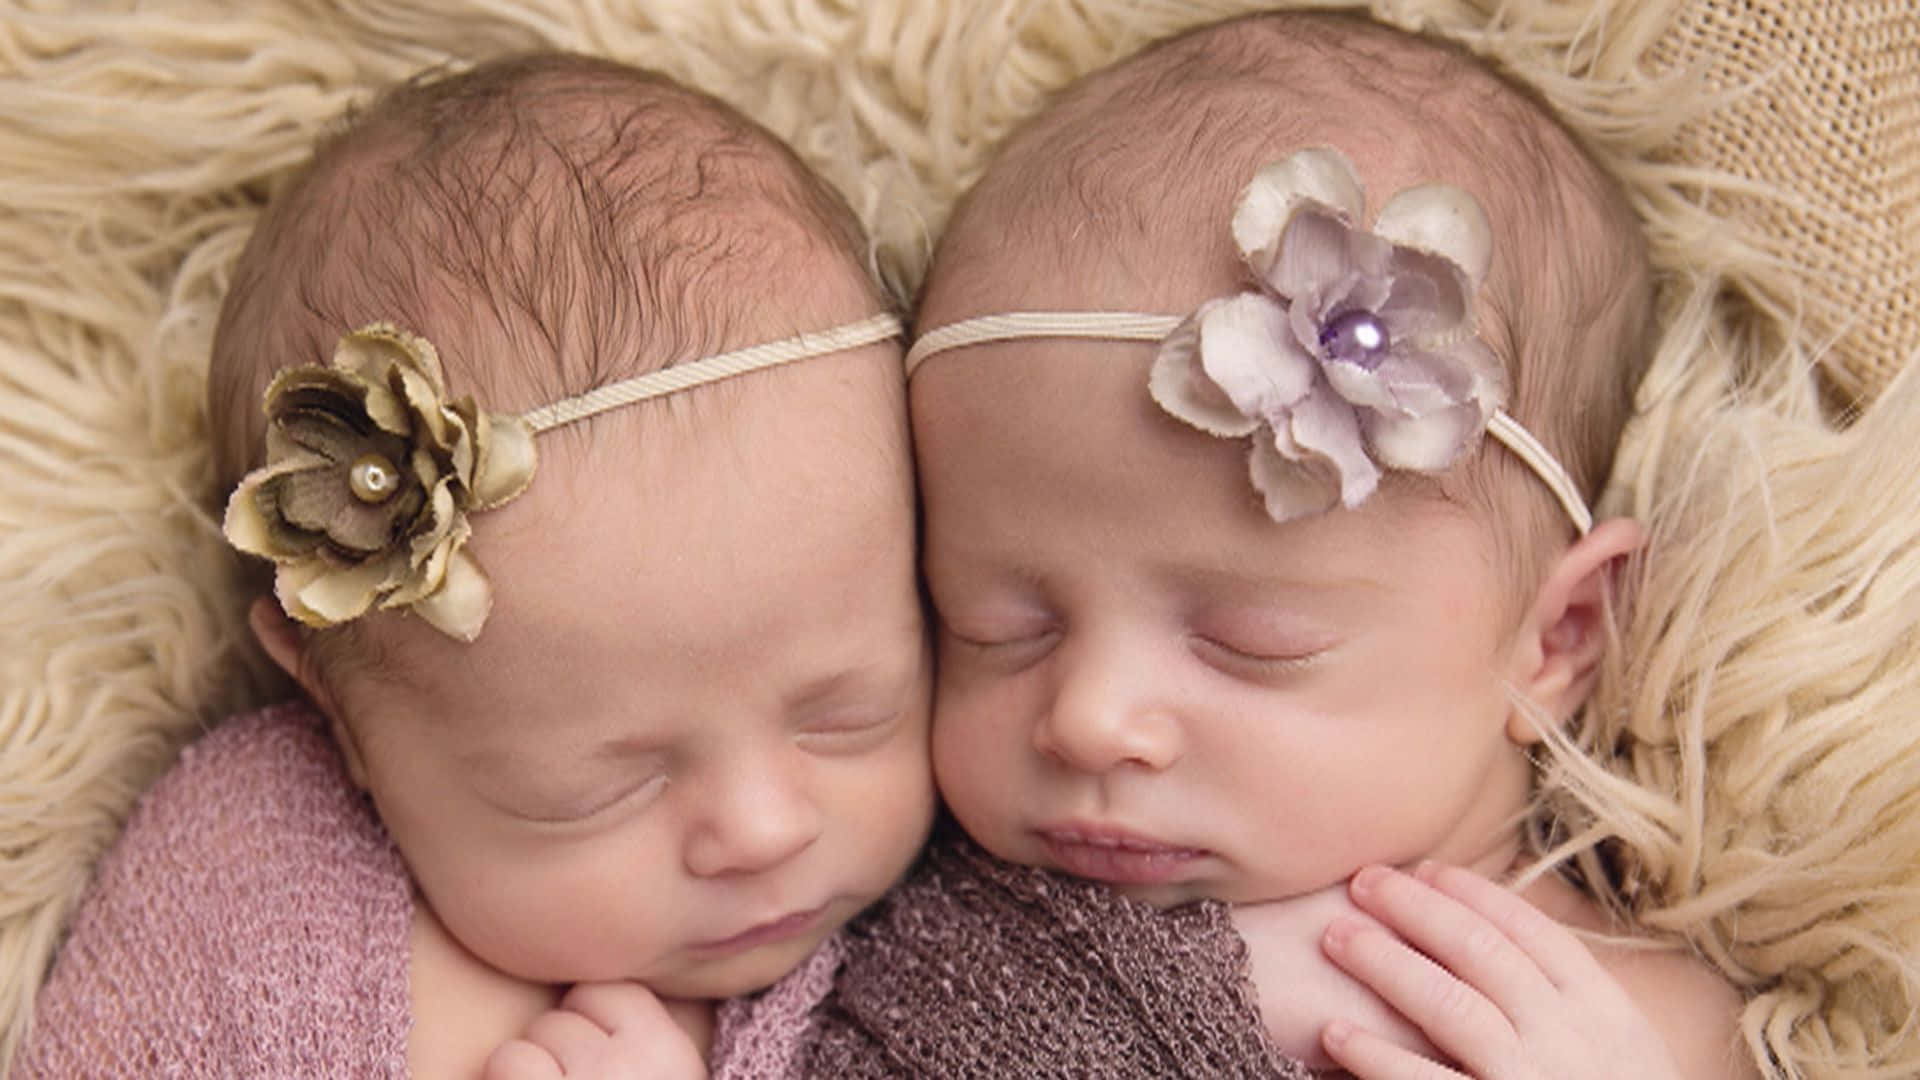 Adorable Twins Capturing Hearts